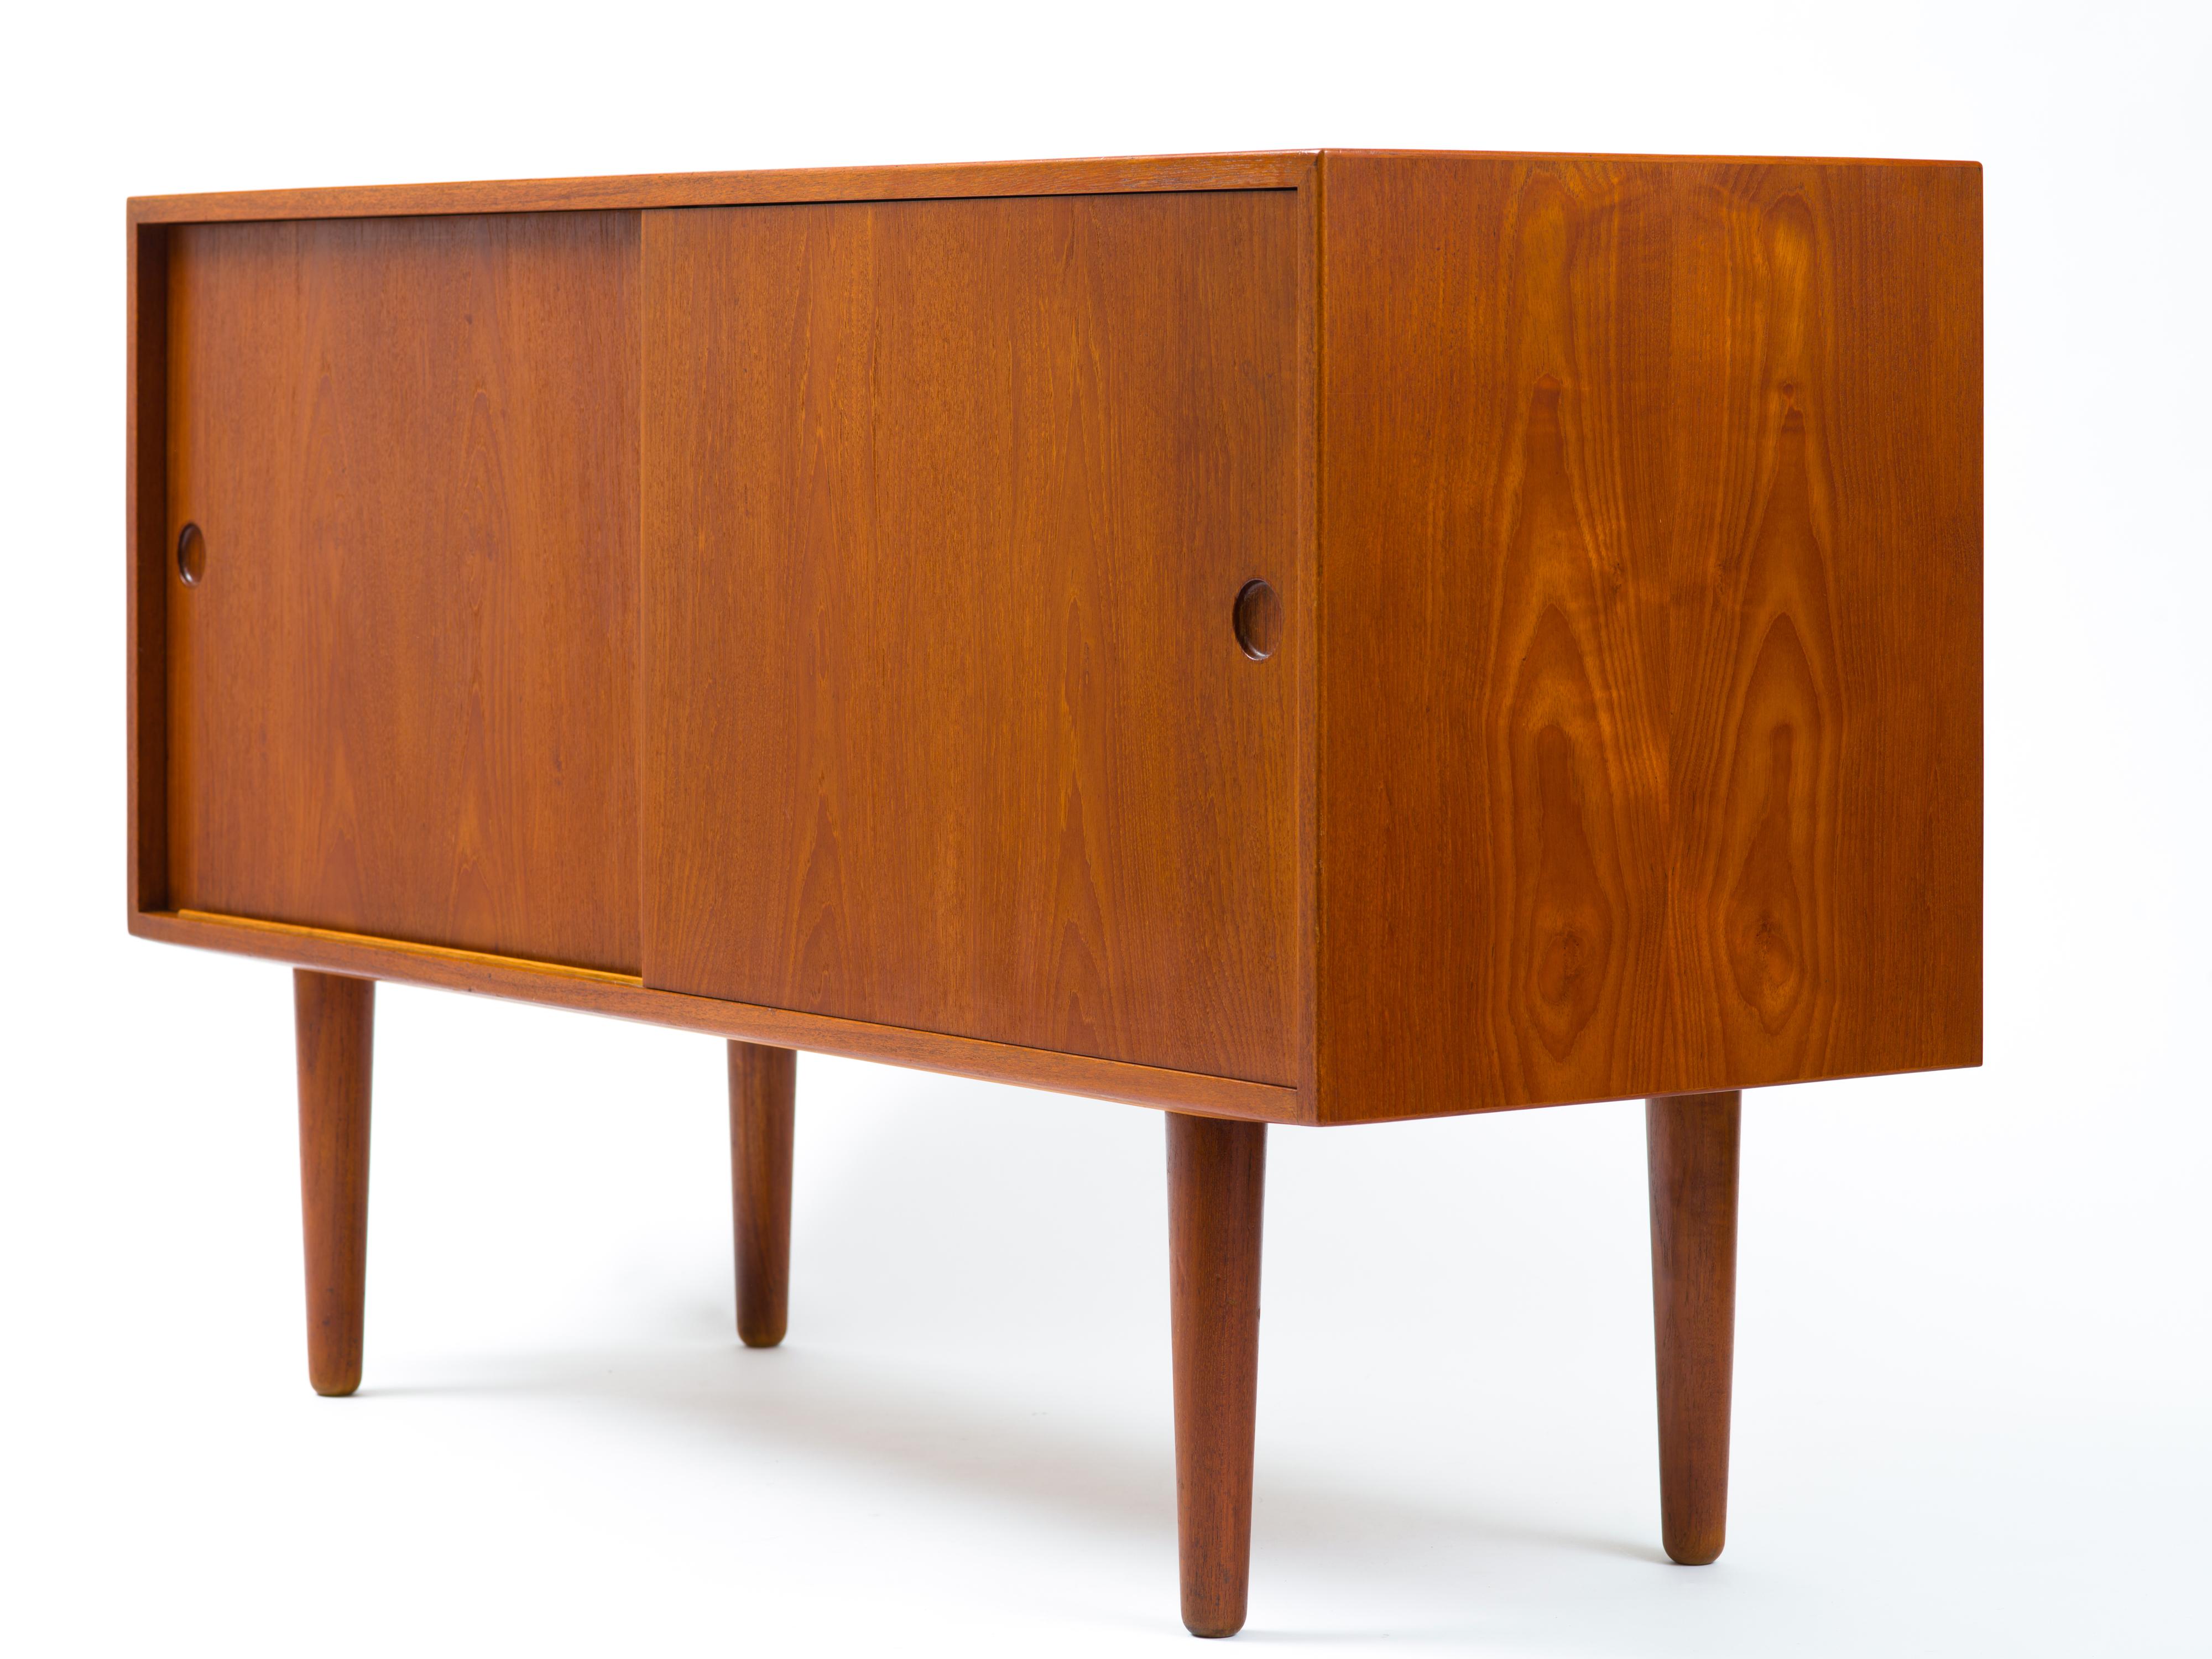 Fine and rare sideboard designed by Hans Wegner and built by eminent Danish cabinetmaker, Johannes Hansen. A pair of doors with integrated pulls conceals two adjustable shelves to the left and five adjustable drawers to the right. The case bears